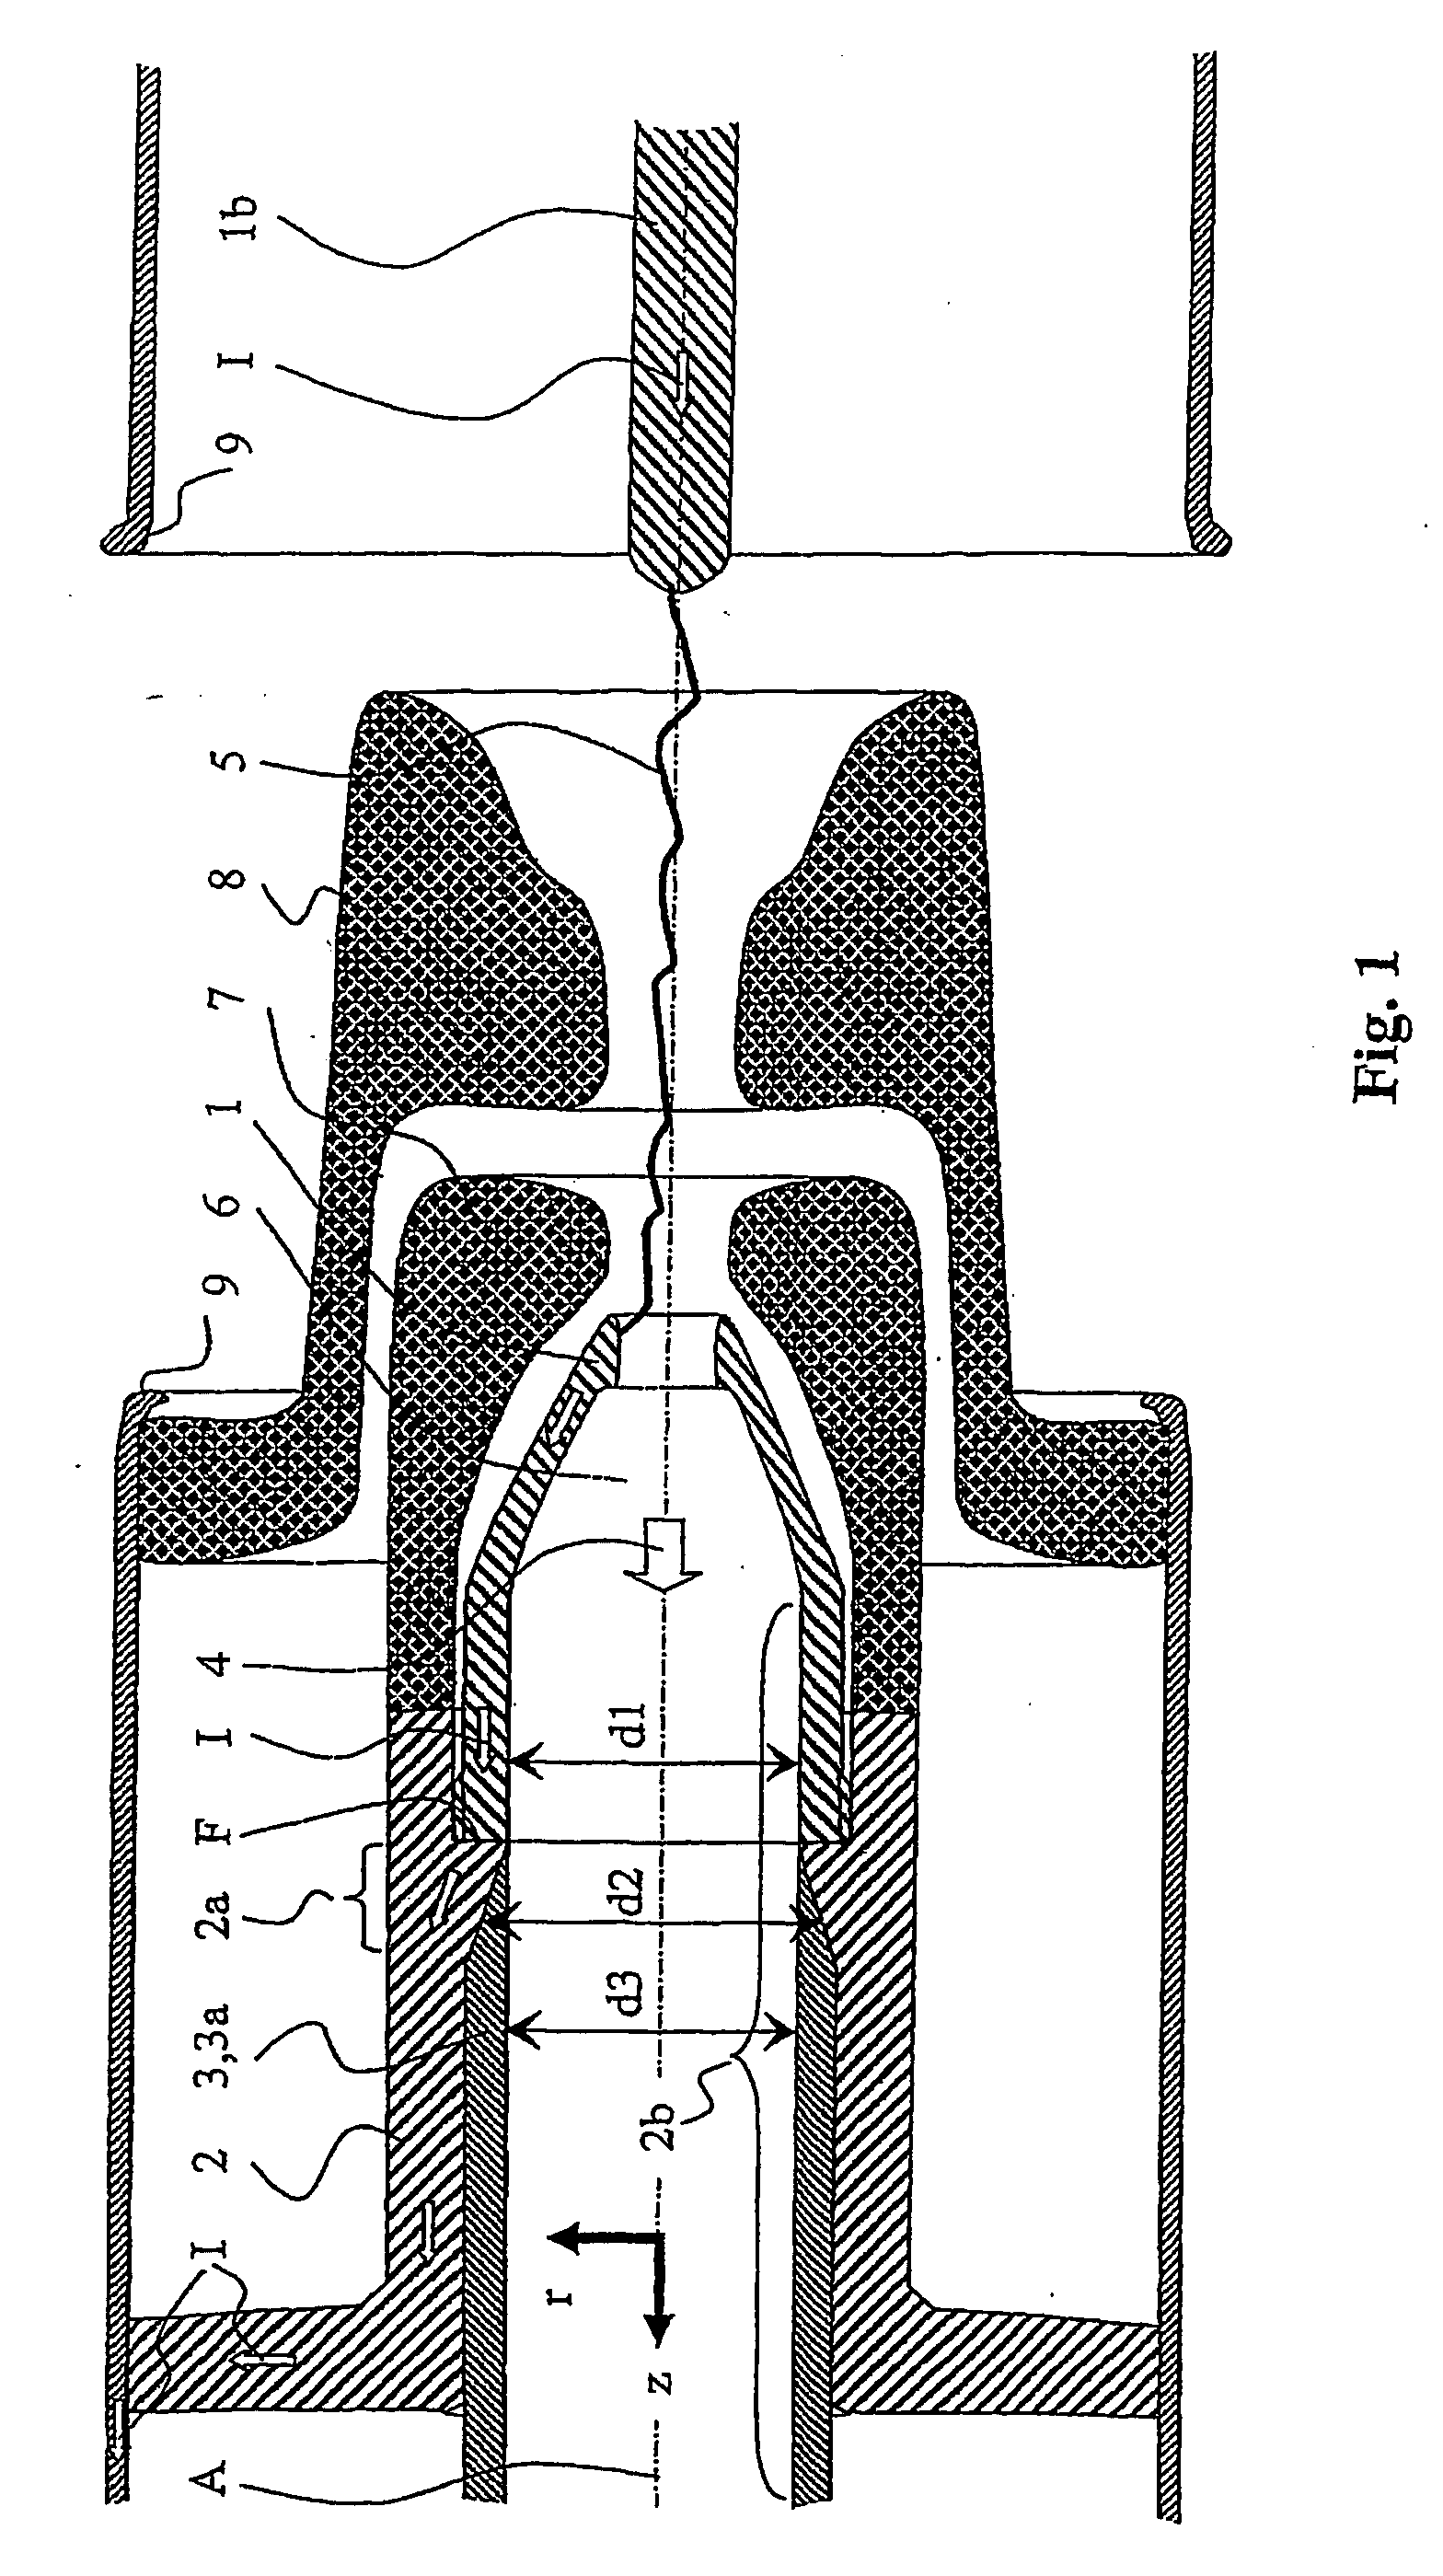 Heavy-duty circuit breaker with erosion-resistant short-circuit current routing